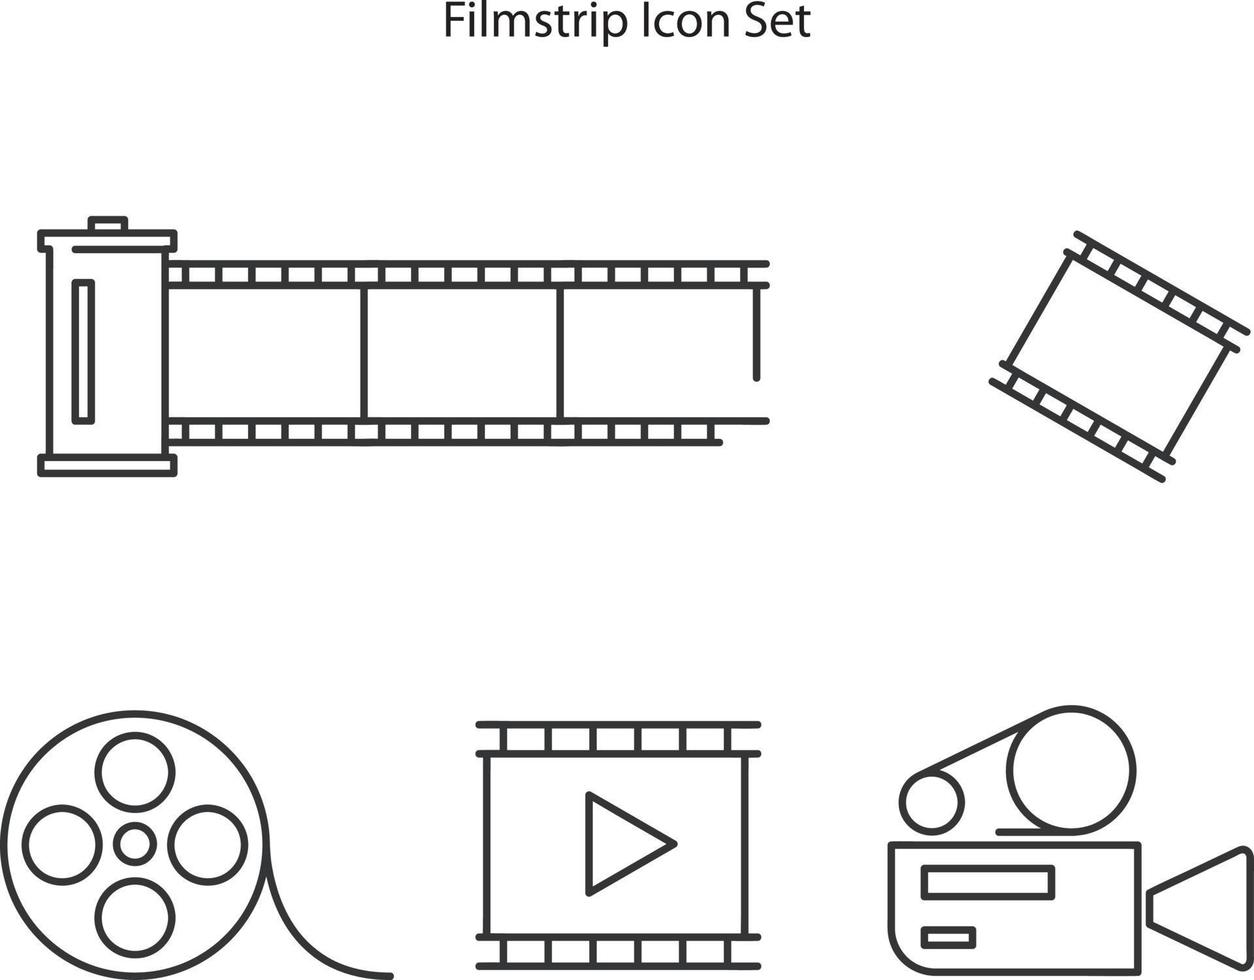 Filmstrip icon set isolated on white background from cinema collection. Filmstrip icon trendy and modern Filmstrip symbol for logo, web, app, UI. Filmstrip icon simple sign. vector